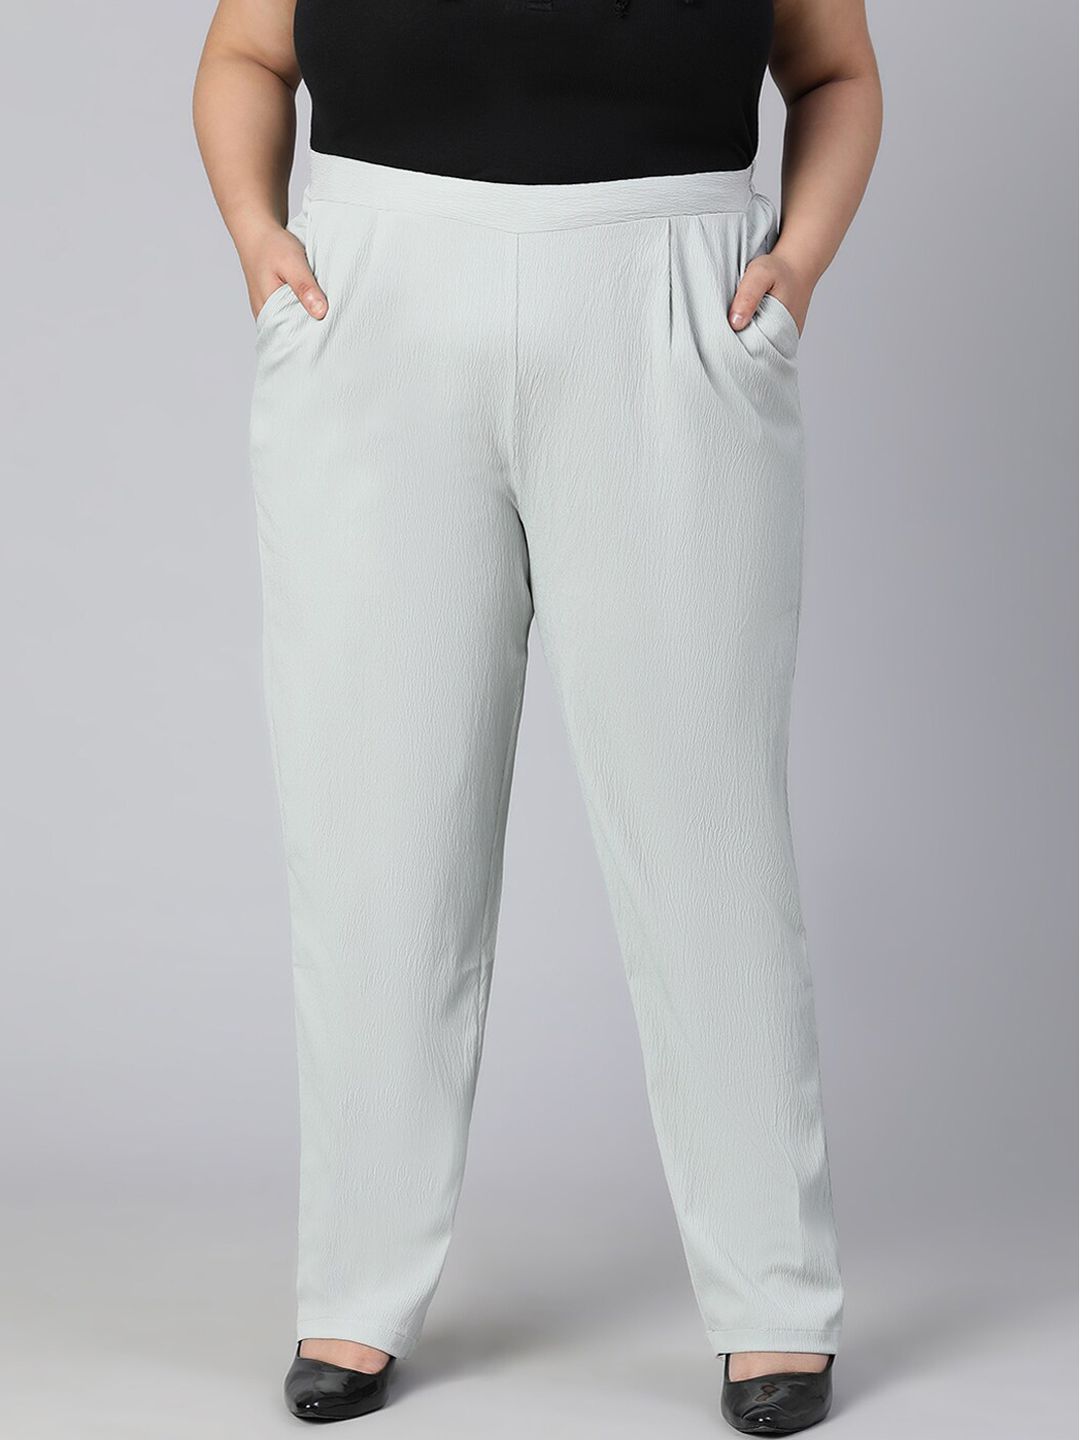 Oxolloxo Women Grey Trousers Price in India